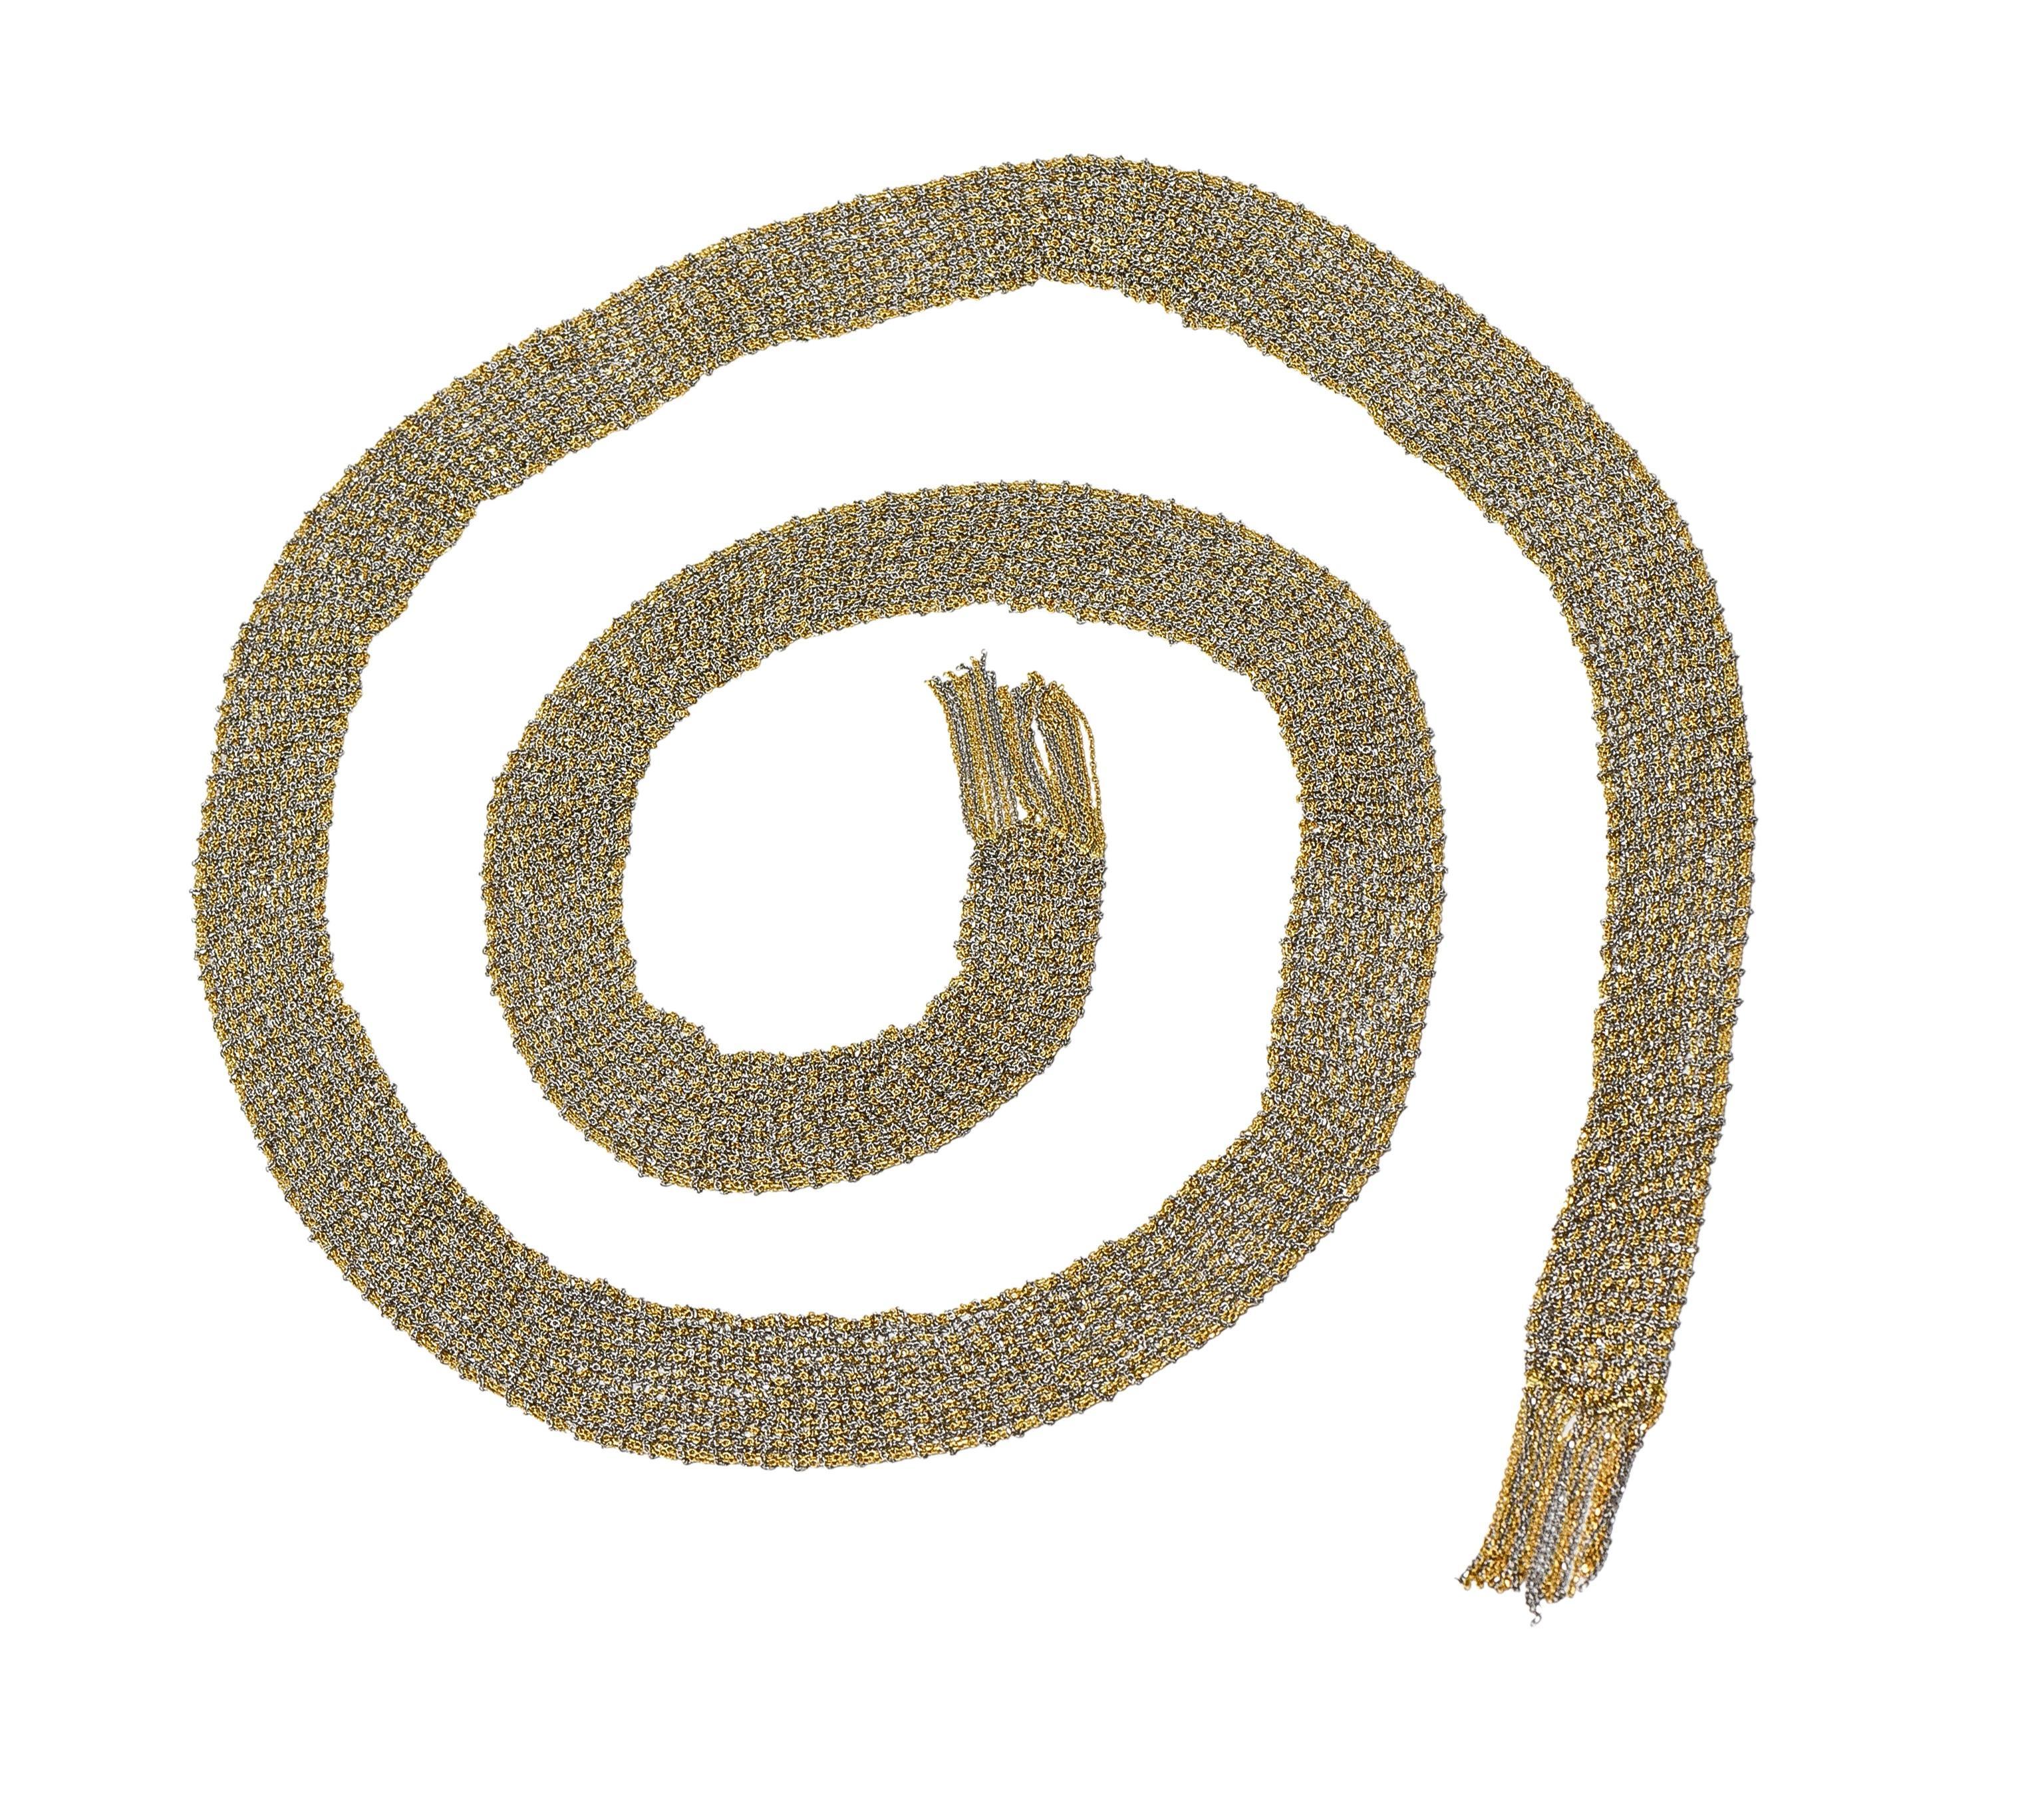 Comprised of finely woven yellow and white gold chain mesh 
Scarf-style with open fringed terminals 
Stamped with Italian assay marks for 18 karat gold
Fully signed for Calgaro
Circa: 2000s 
Width at widest: 3/4 inch
Length: 42 3/8 inches
Total